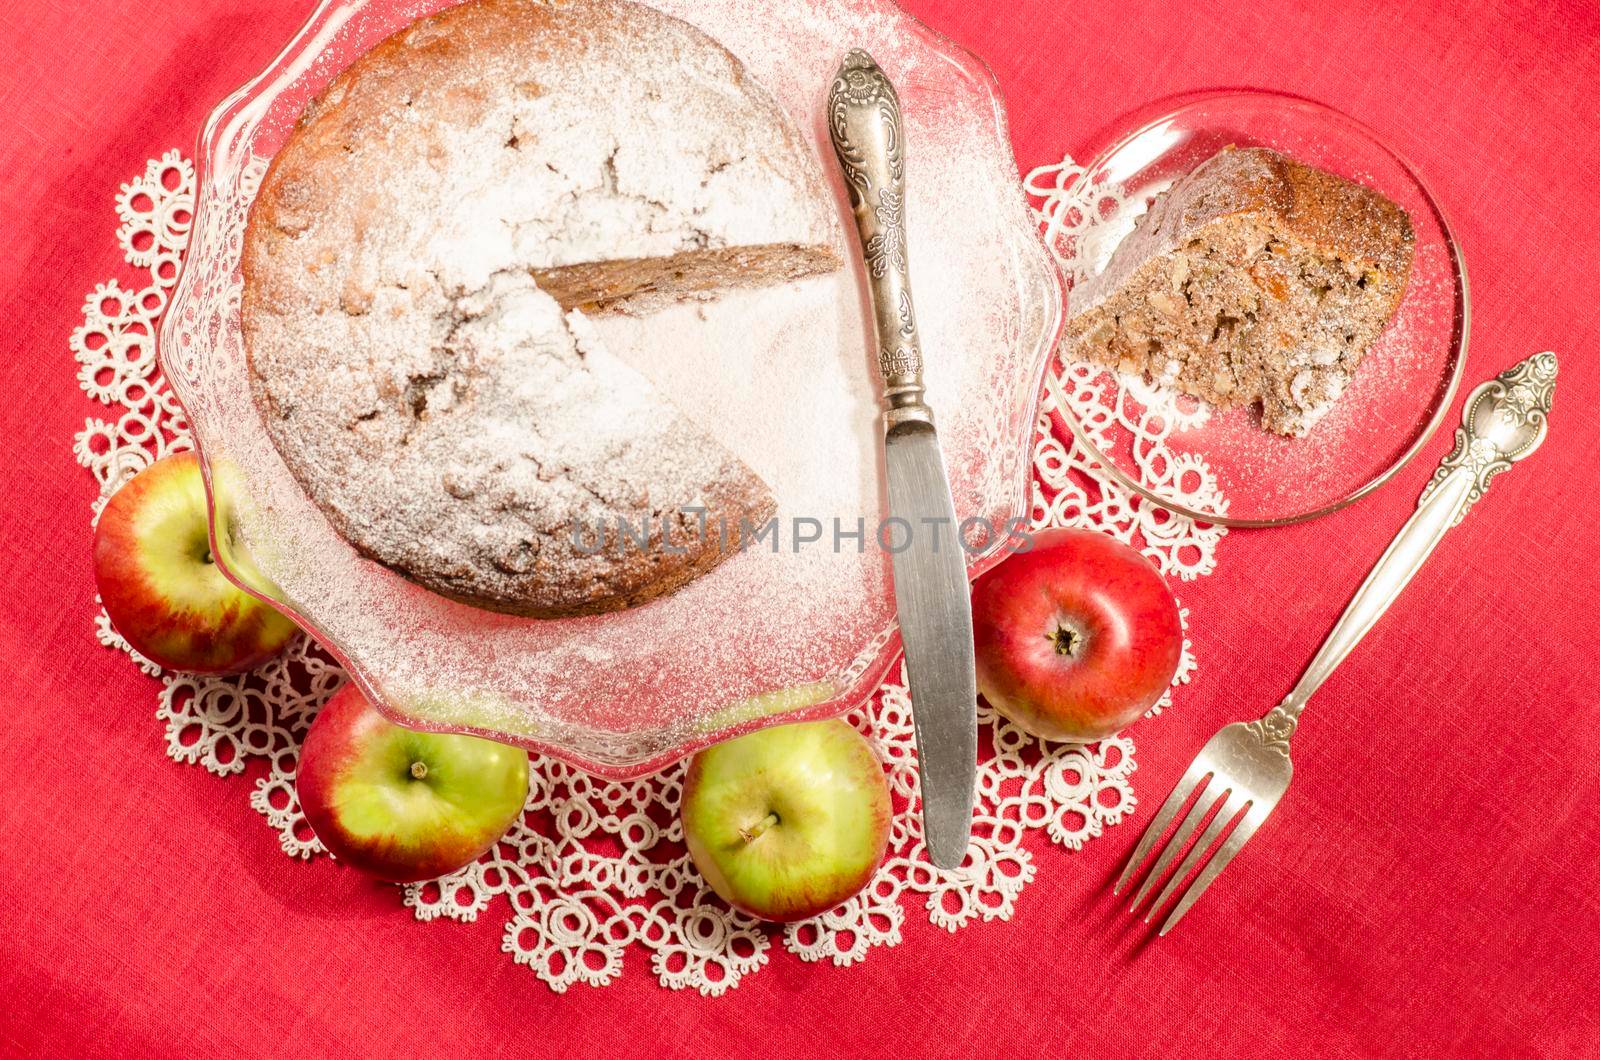 Applesauce raisin rum cake for christmas table. Table decorated with lacy napkin. From series of "Merry Christmas"